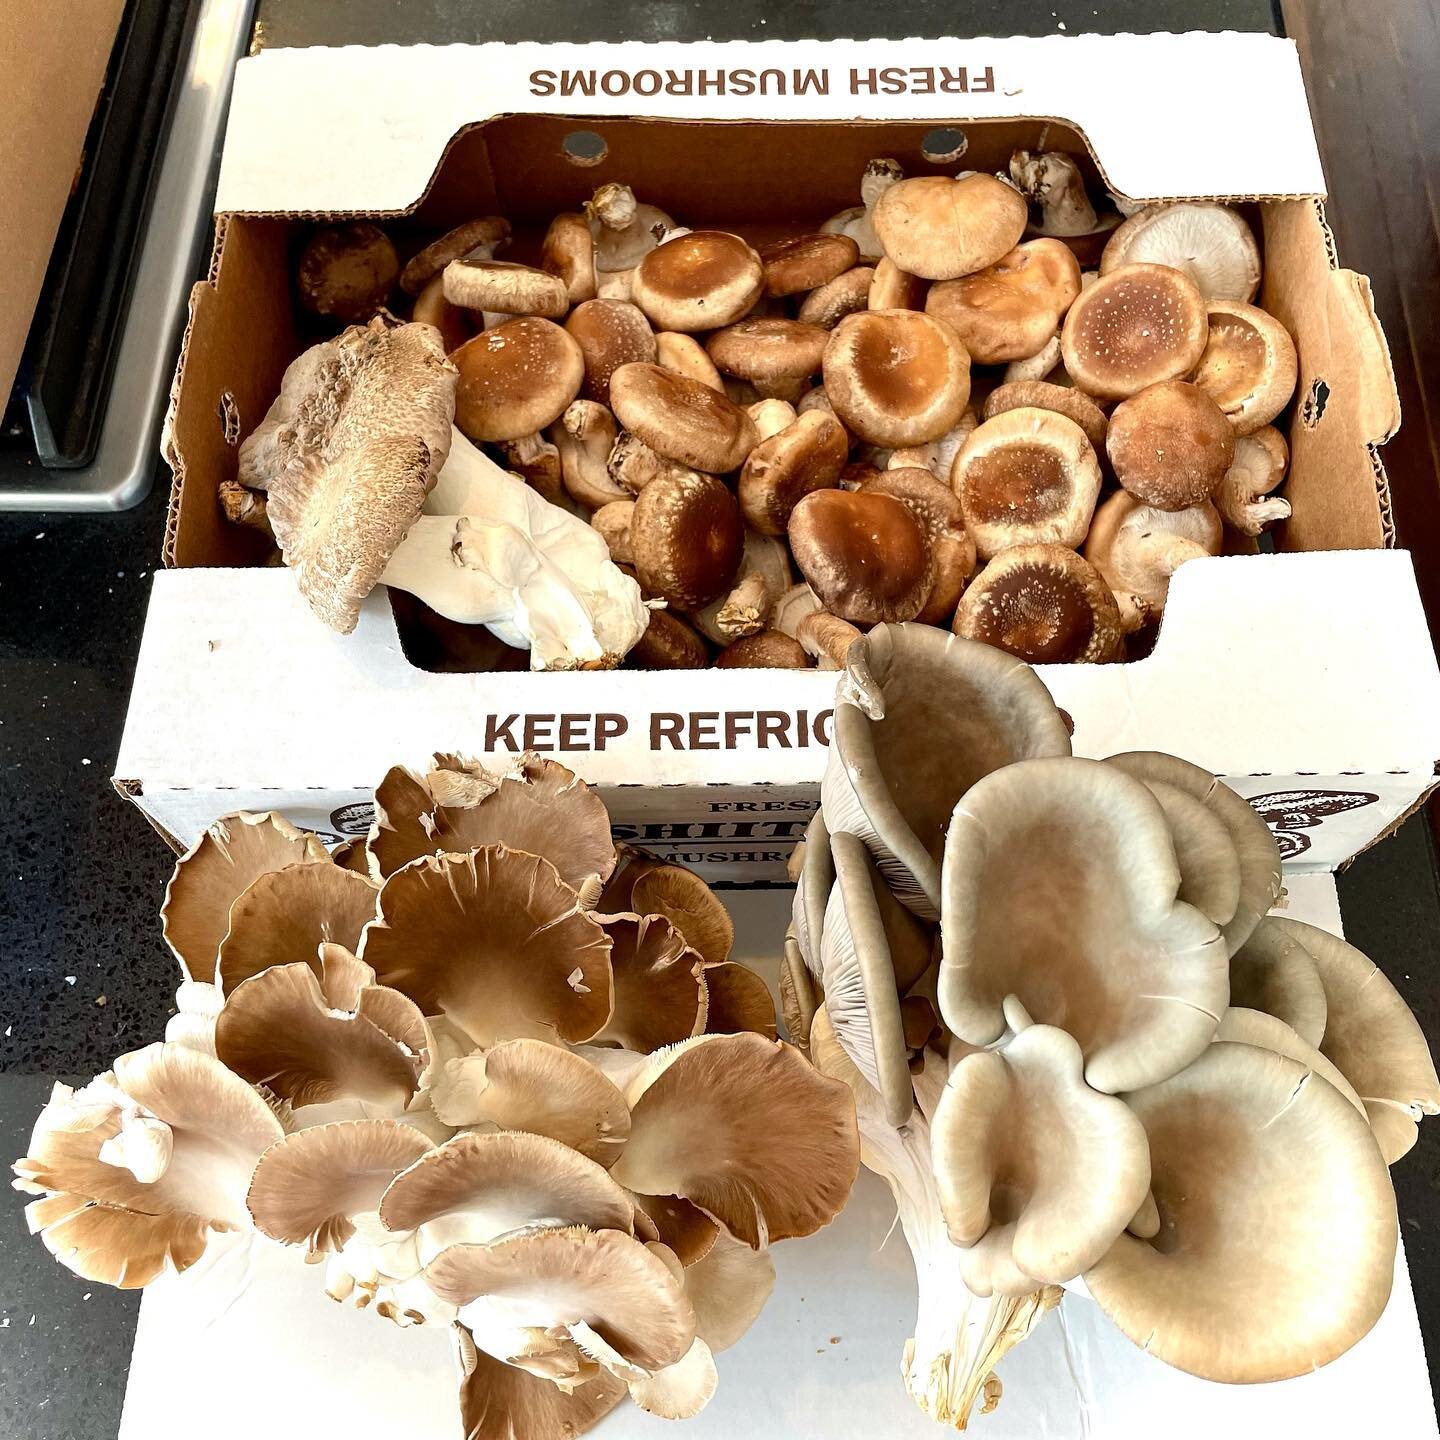 Check out these awesome mushrooms from @fungified_farm 🍄🍄🍄
Grown locally in Montgomery County and they deliver right to your house!
.
.
#mushrooms #naturallygrown #love #beautiful #food #shoplocal #supportlocal #vestabbq #supportsmallbusiness